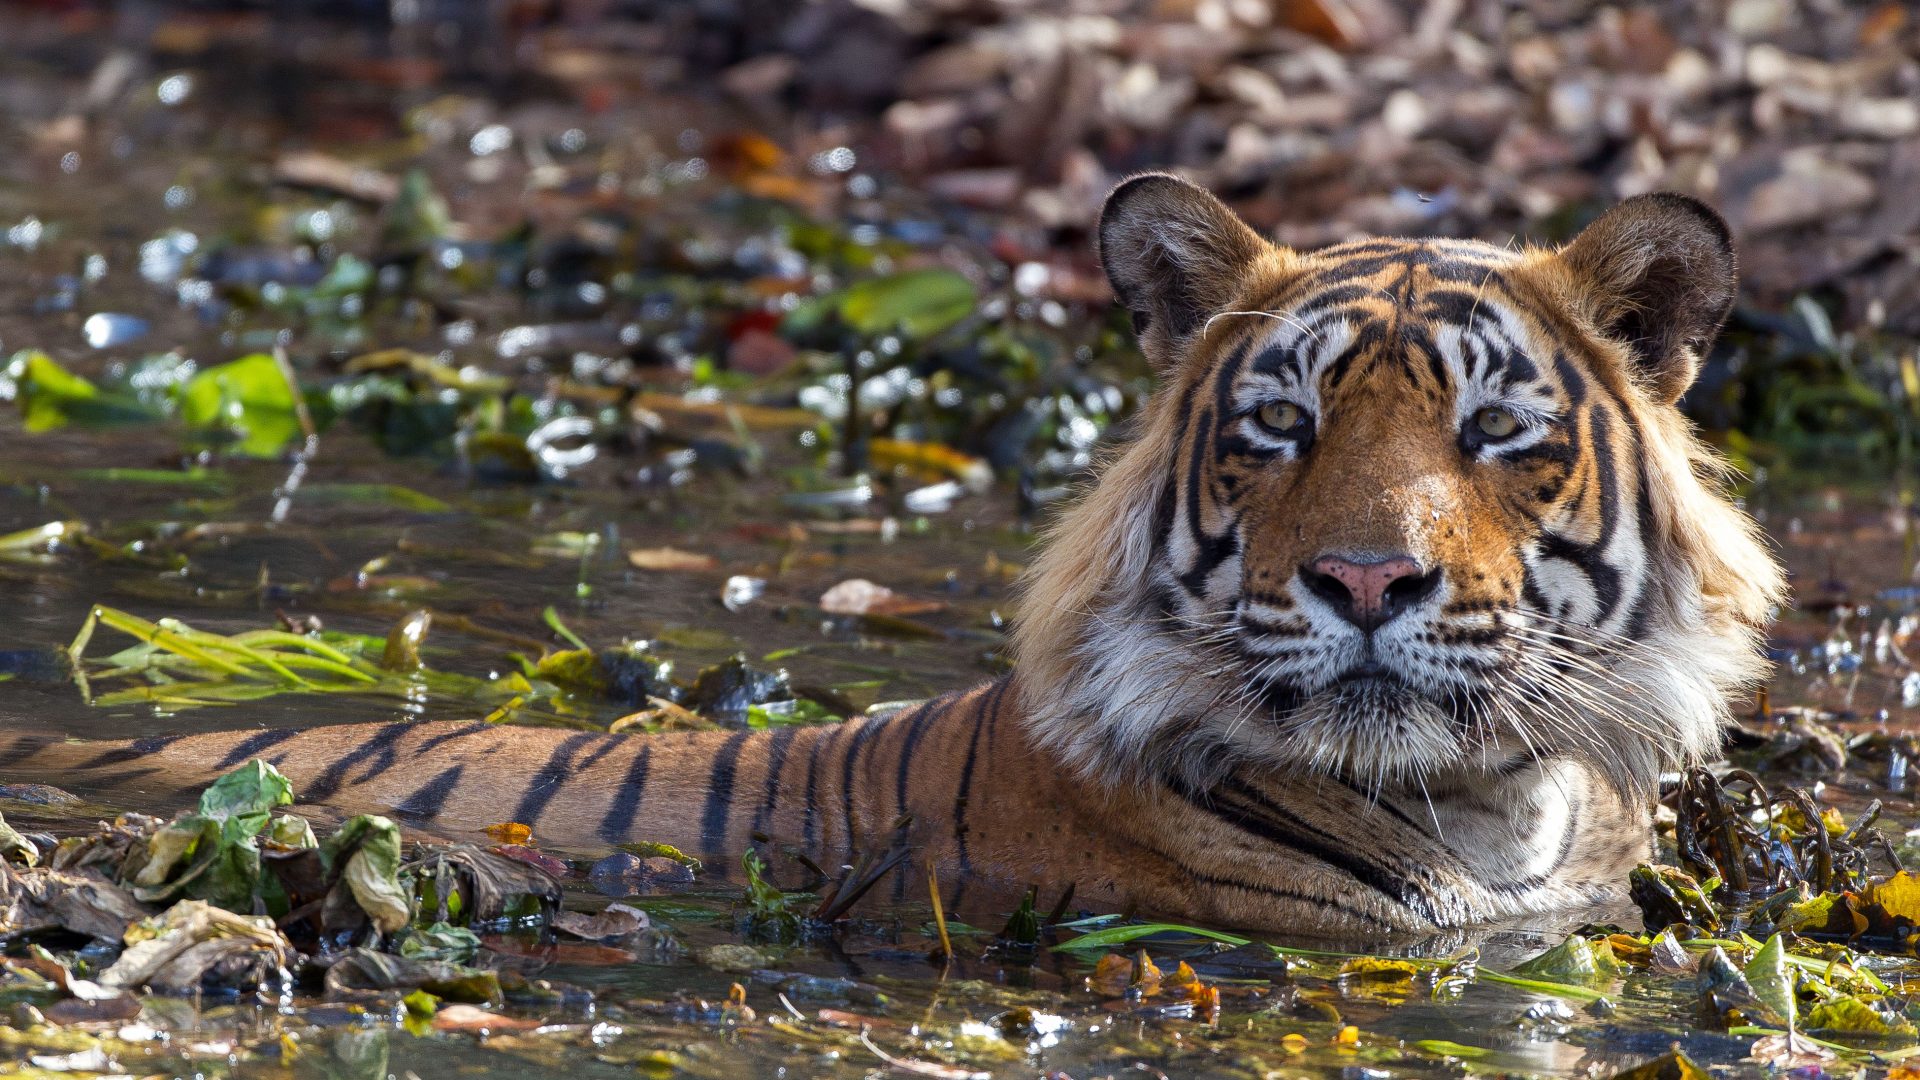 A tiger cooling off in a leafy pool of water